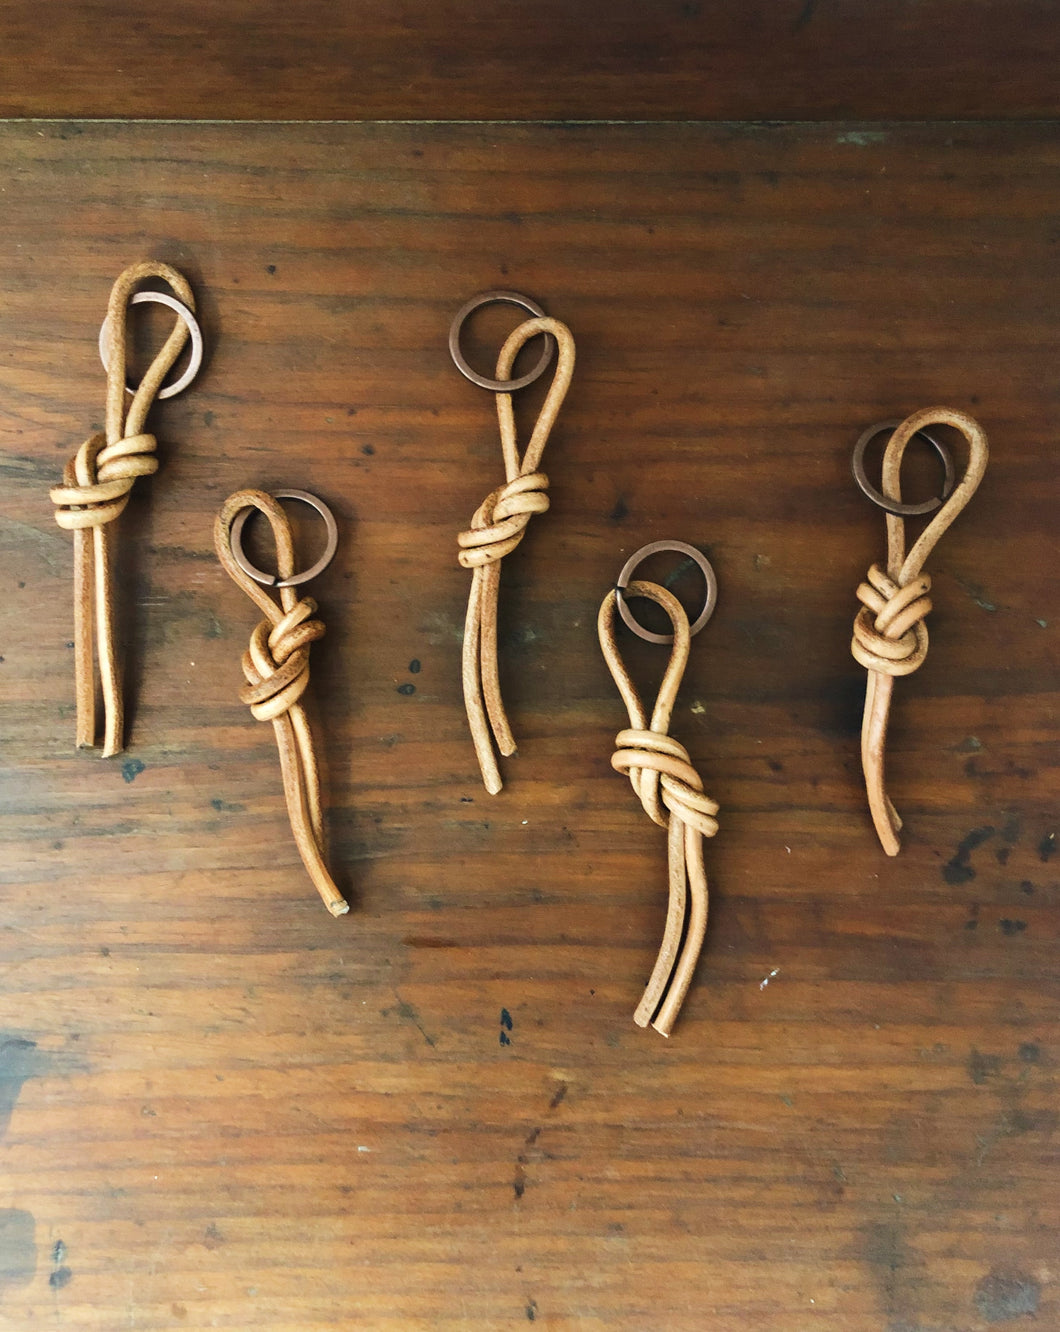 Keyring Knot - Leather